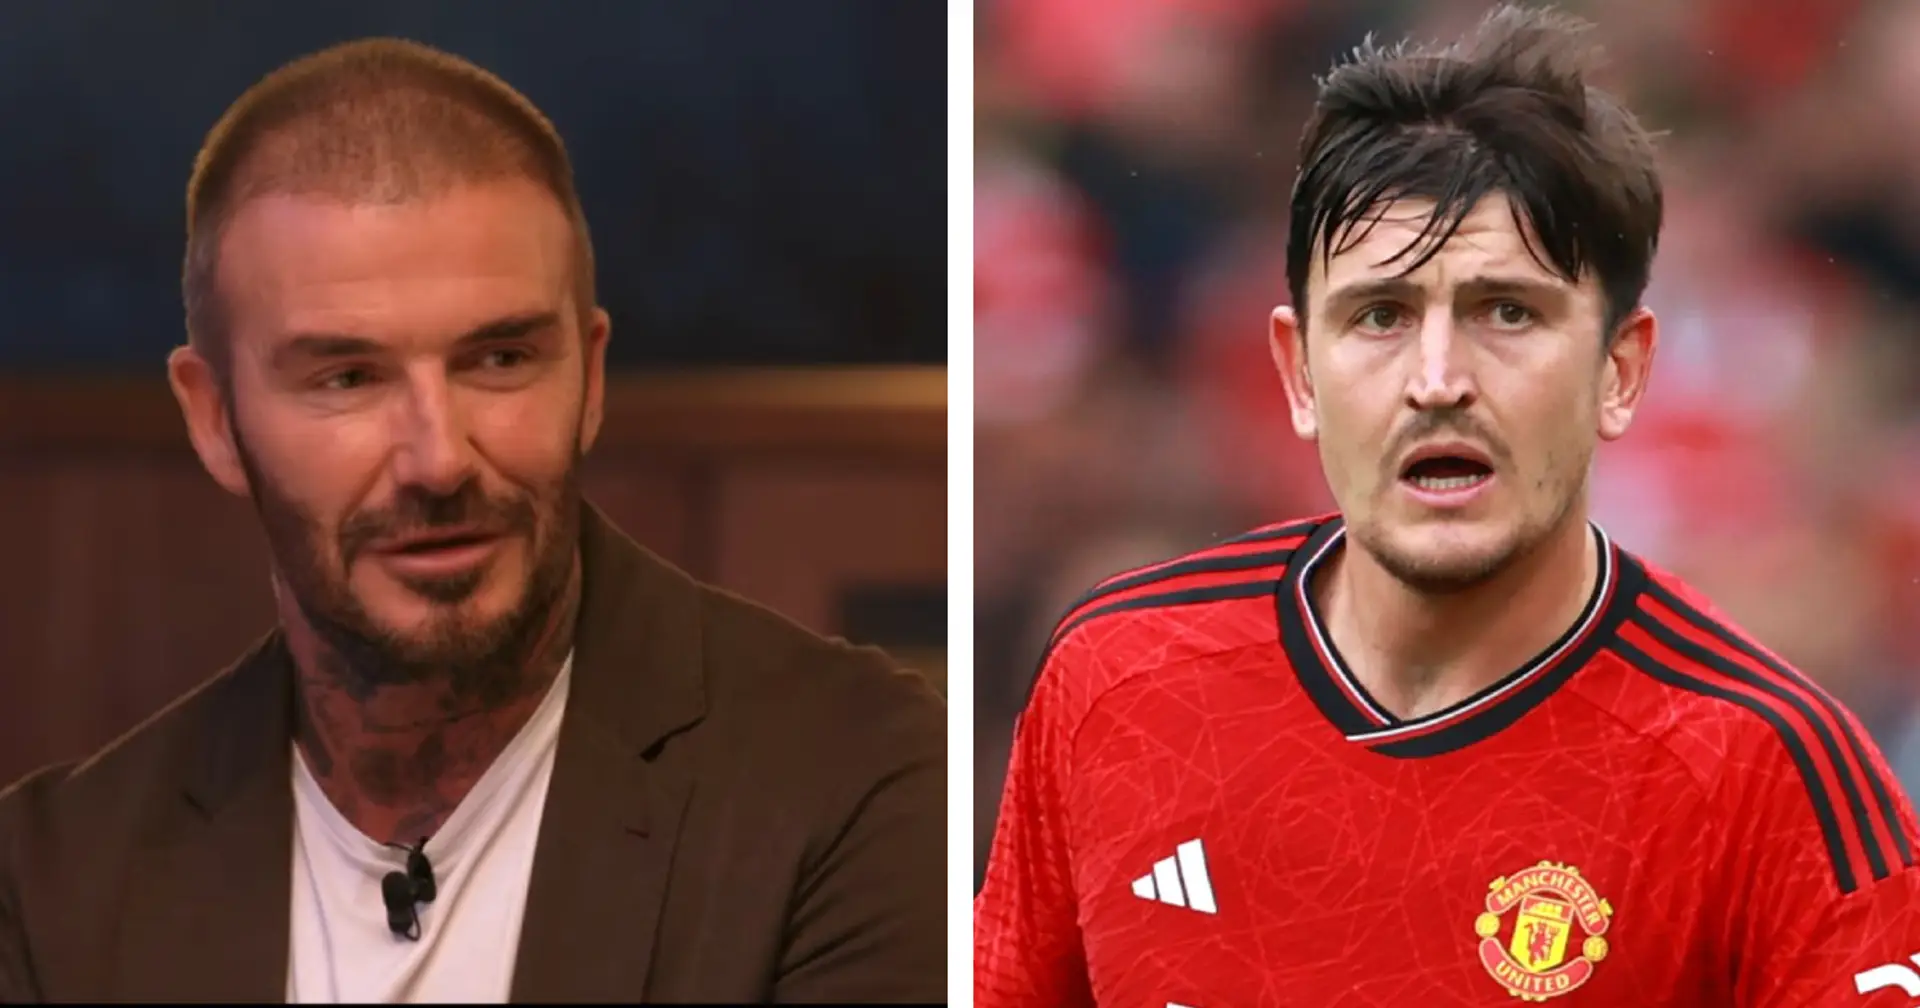 David Beckham: 'The criticism of Maguire has gone too far'